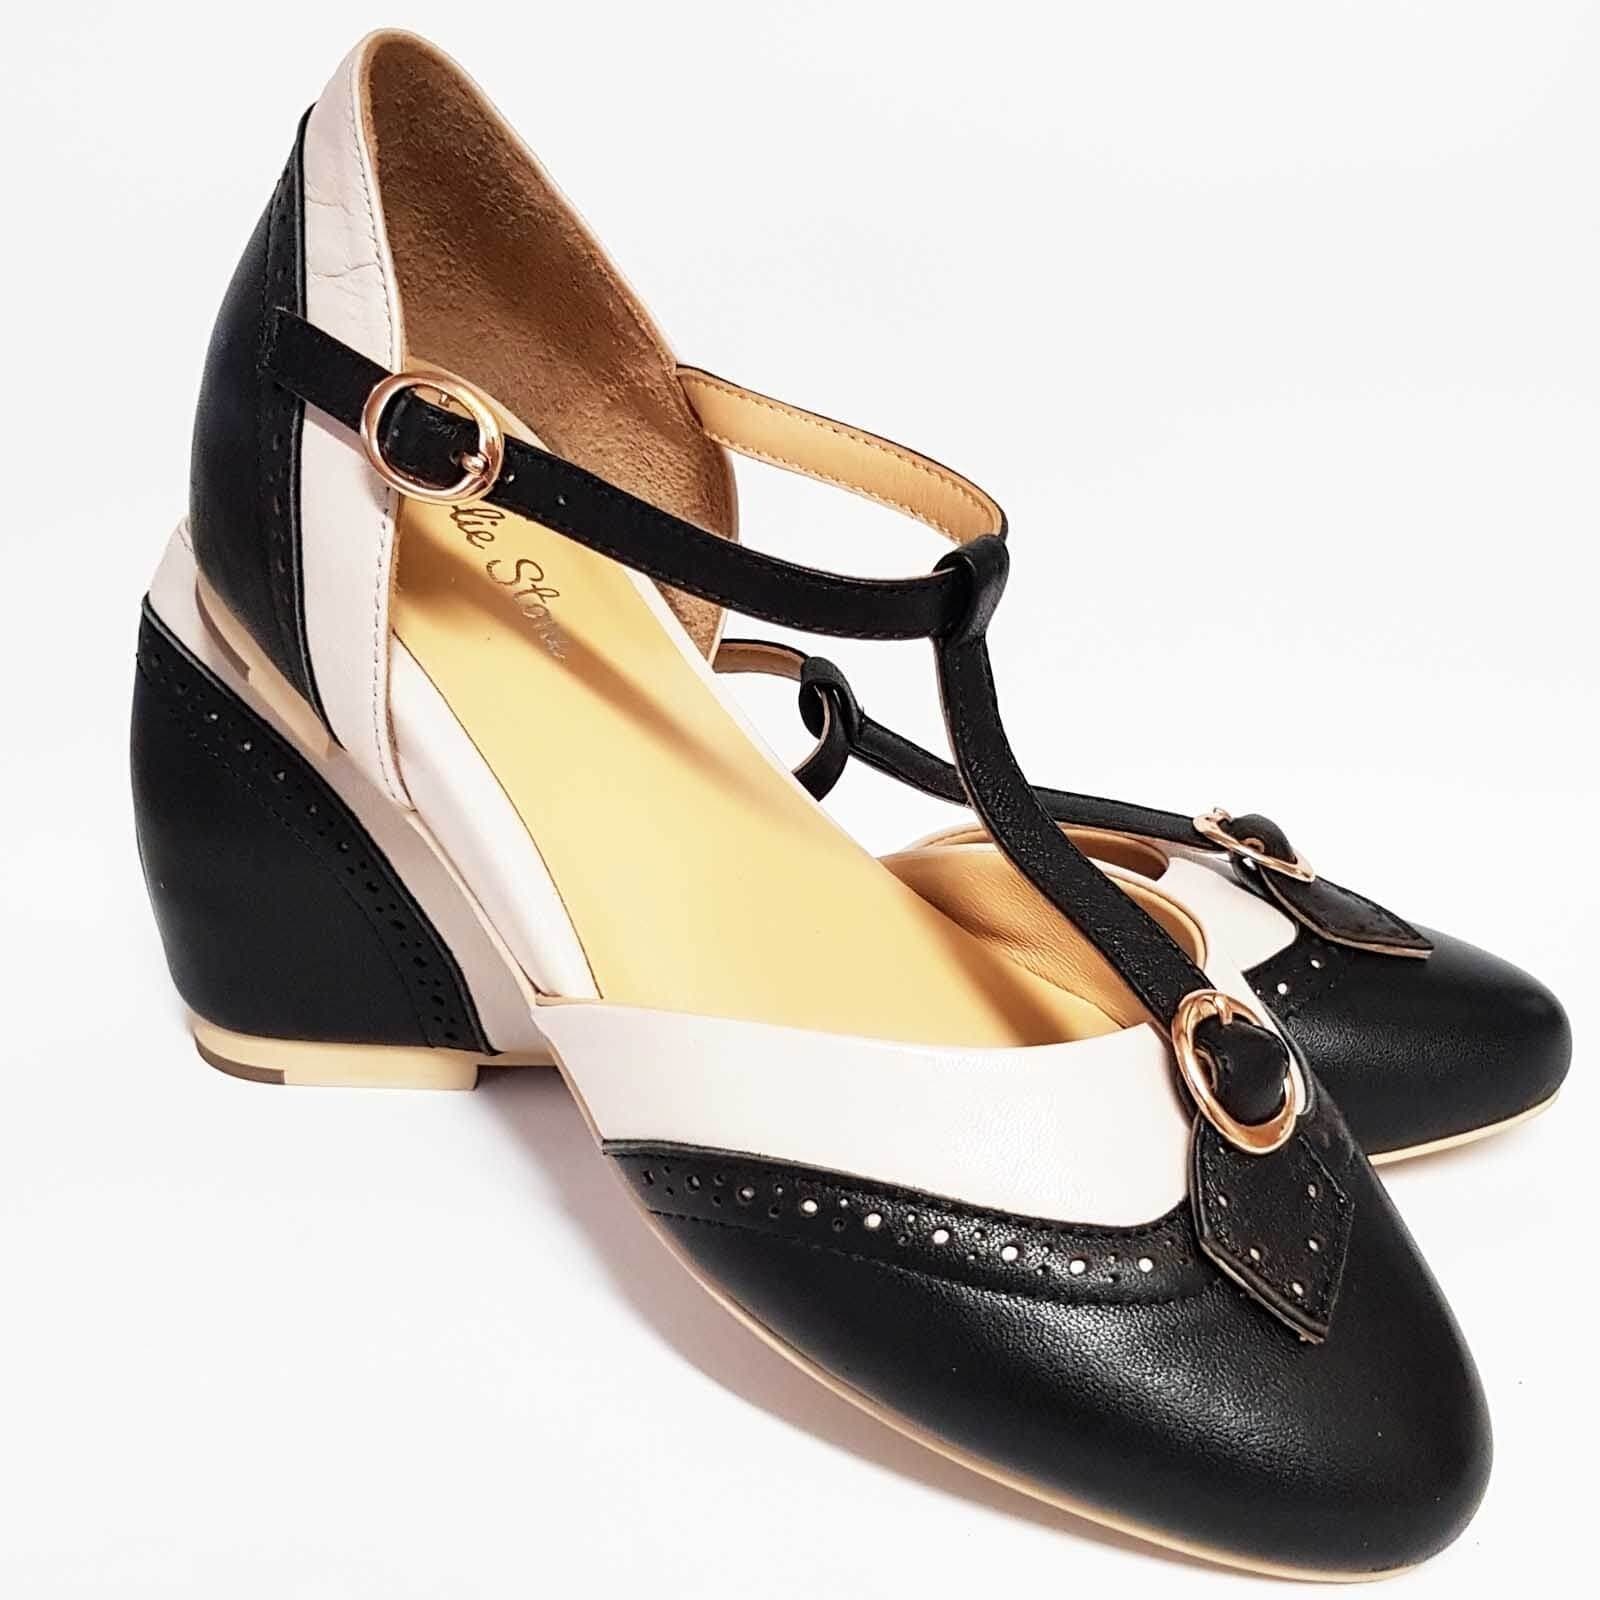 Vintage style flats by Charlie Stone Shoes Parisienne in two tone